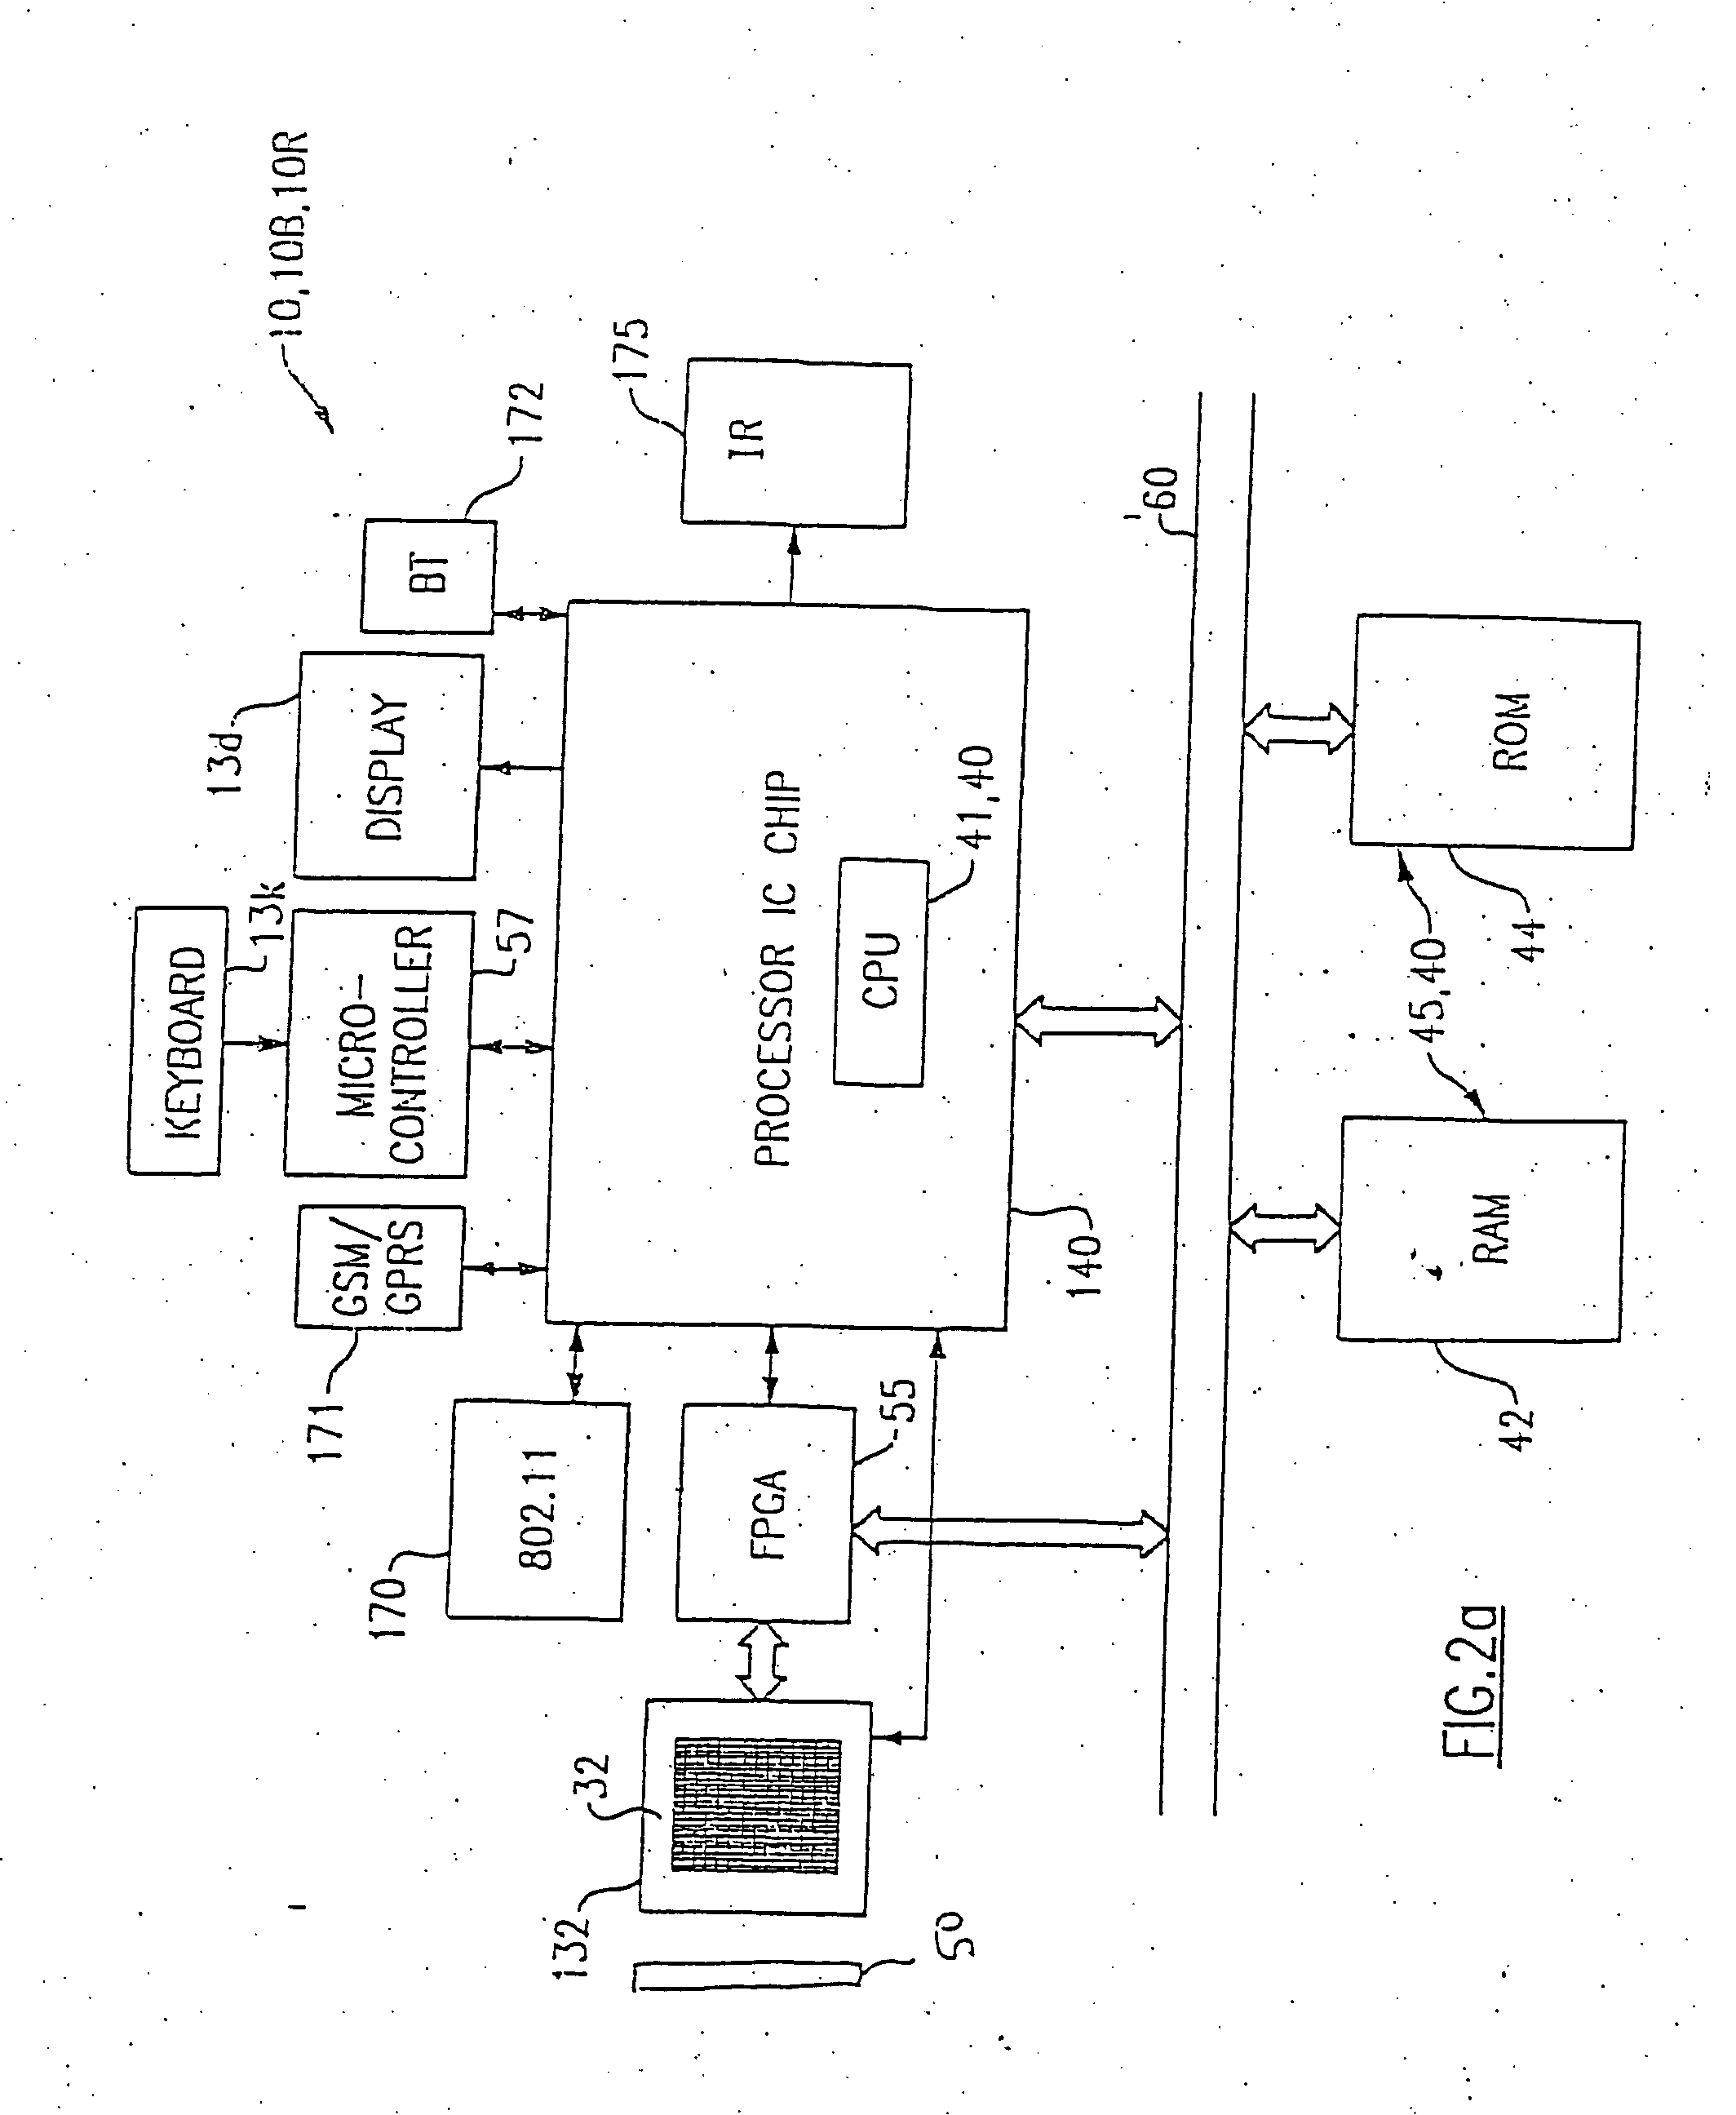 Memory data copying system for devices